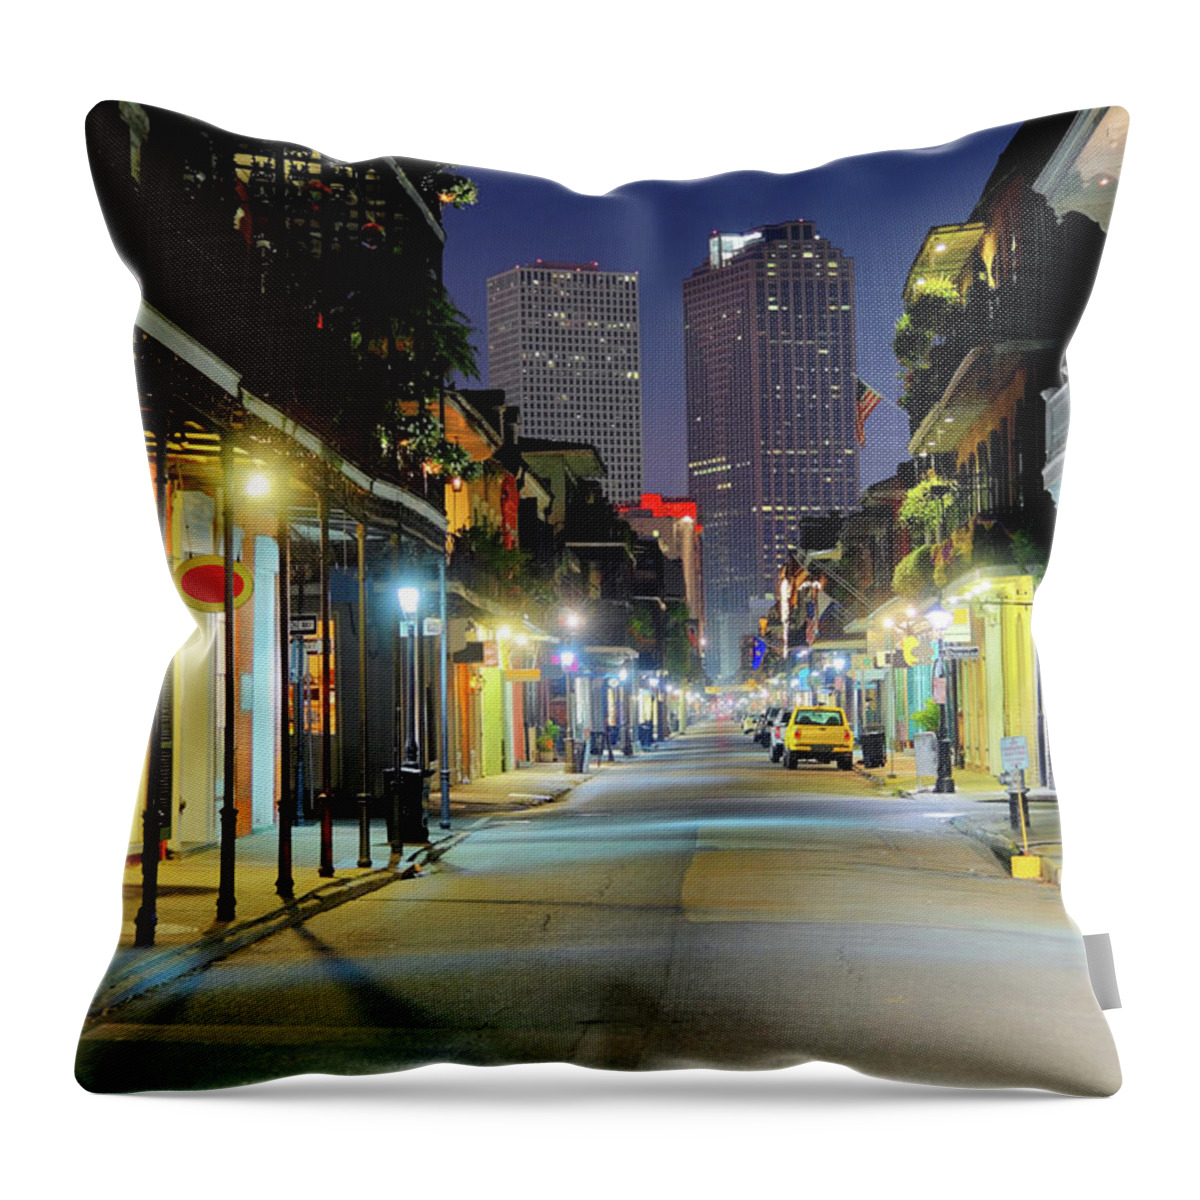 Nightclub Throw Pillow featuring the photograph French Quarter by Denistangneyjr